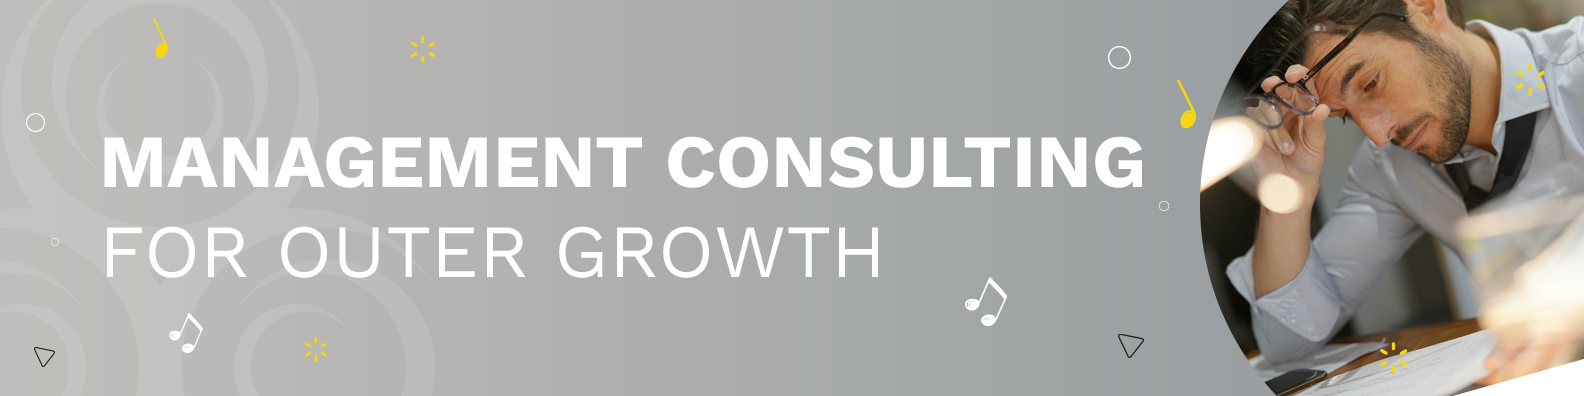 Mgmt Consulting Header